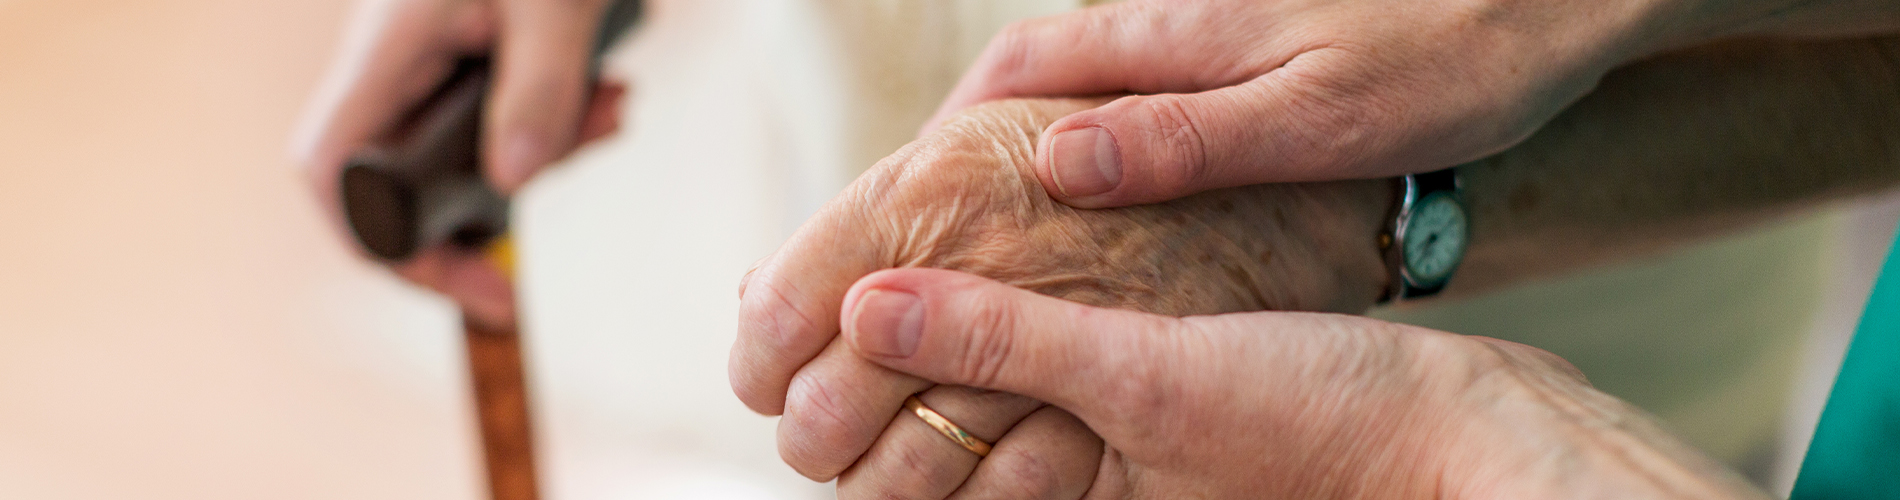 Consoling elderly person - Aged Care 1900x500